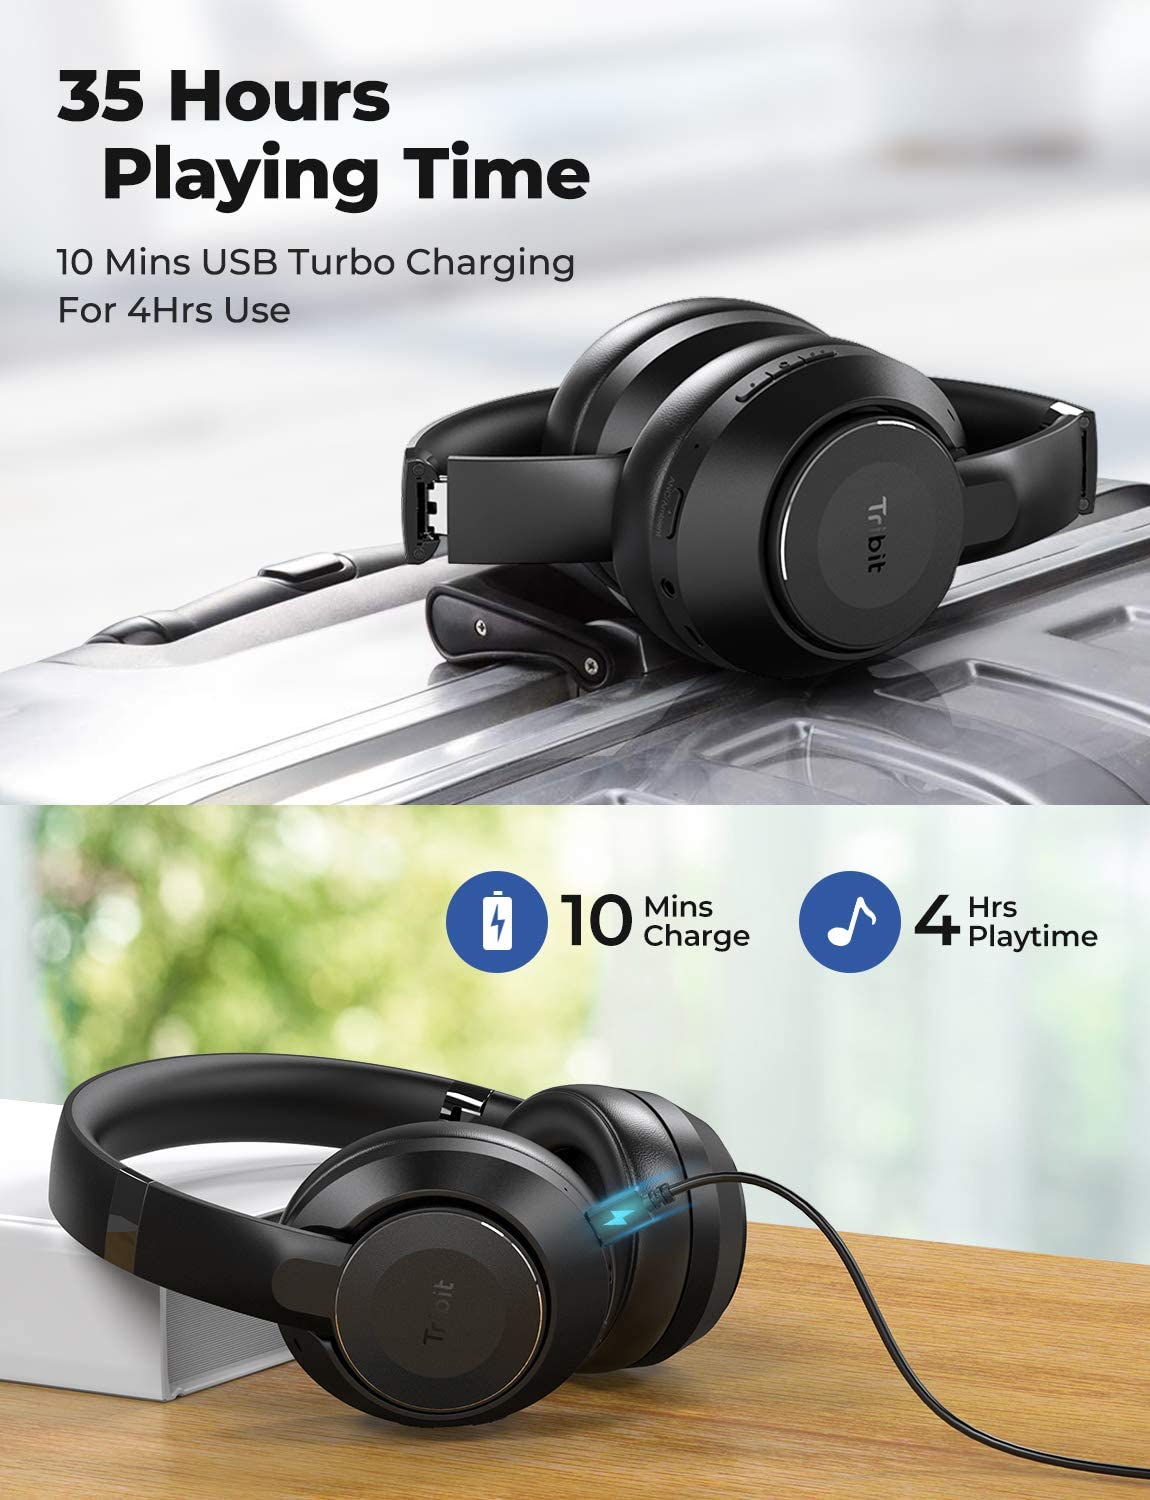 Tribit QuietPlus 78 Active Noise Cancelling Wireless Headphones Bluetooth 5.0 Foldable with Memory Pads 35h Playtime Deep Bass BTH78